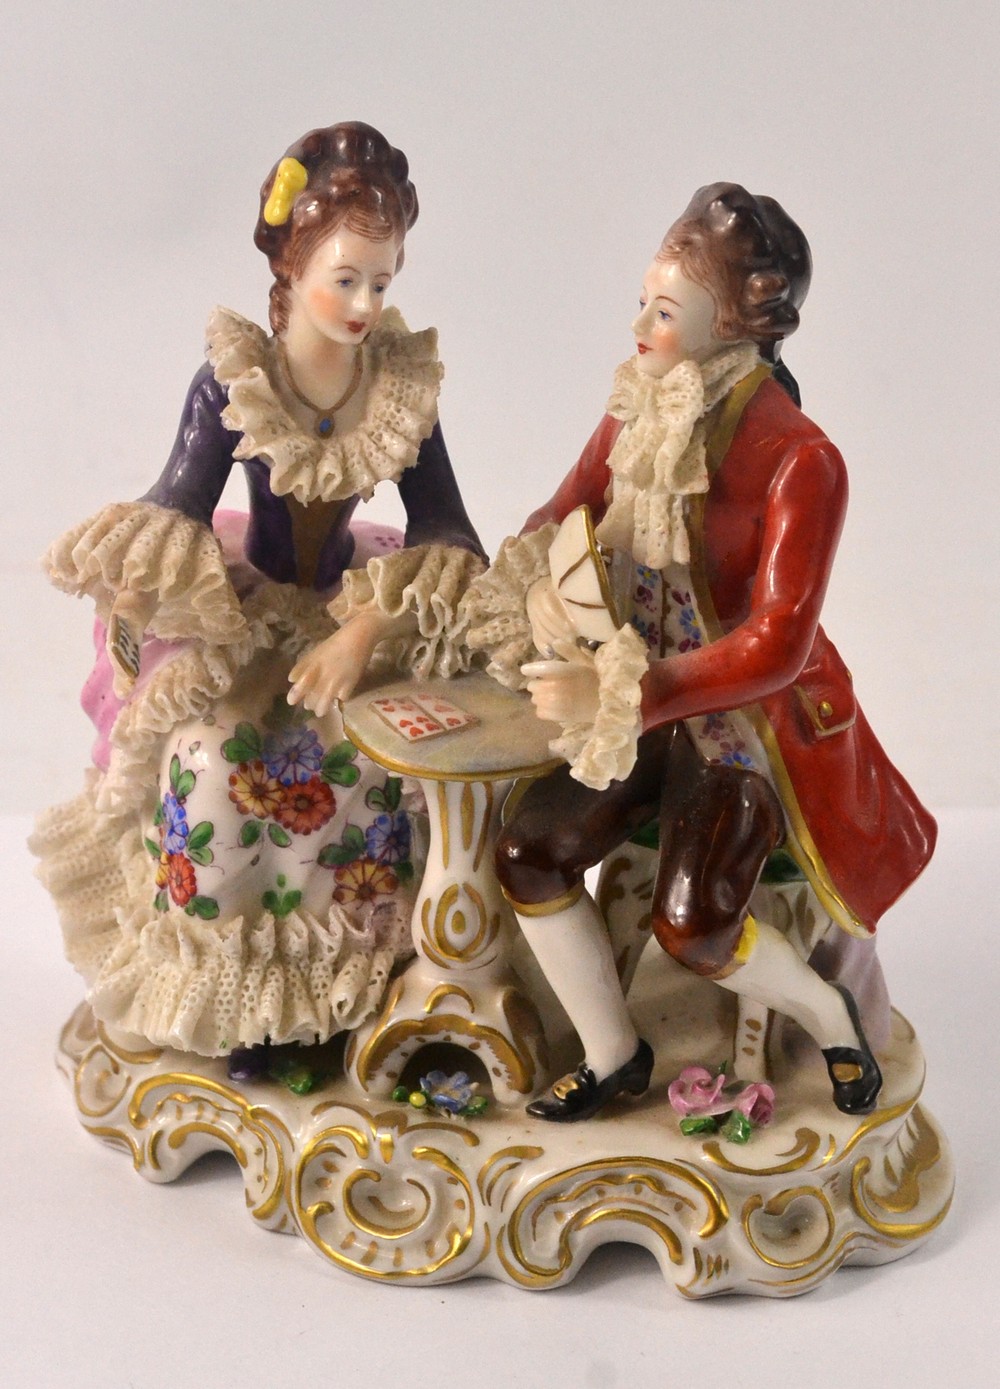 Fine quality German porcelain figure group of male and female